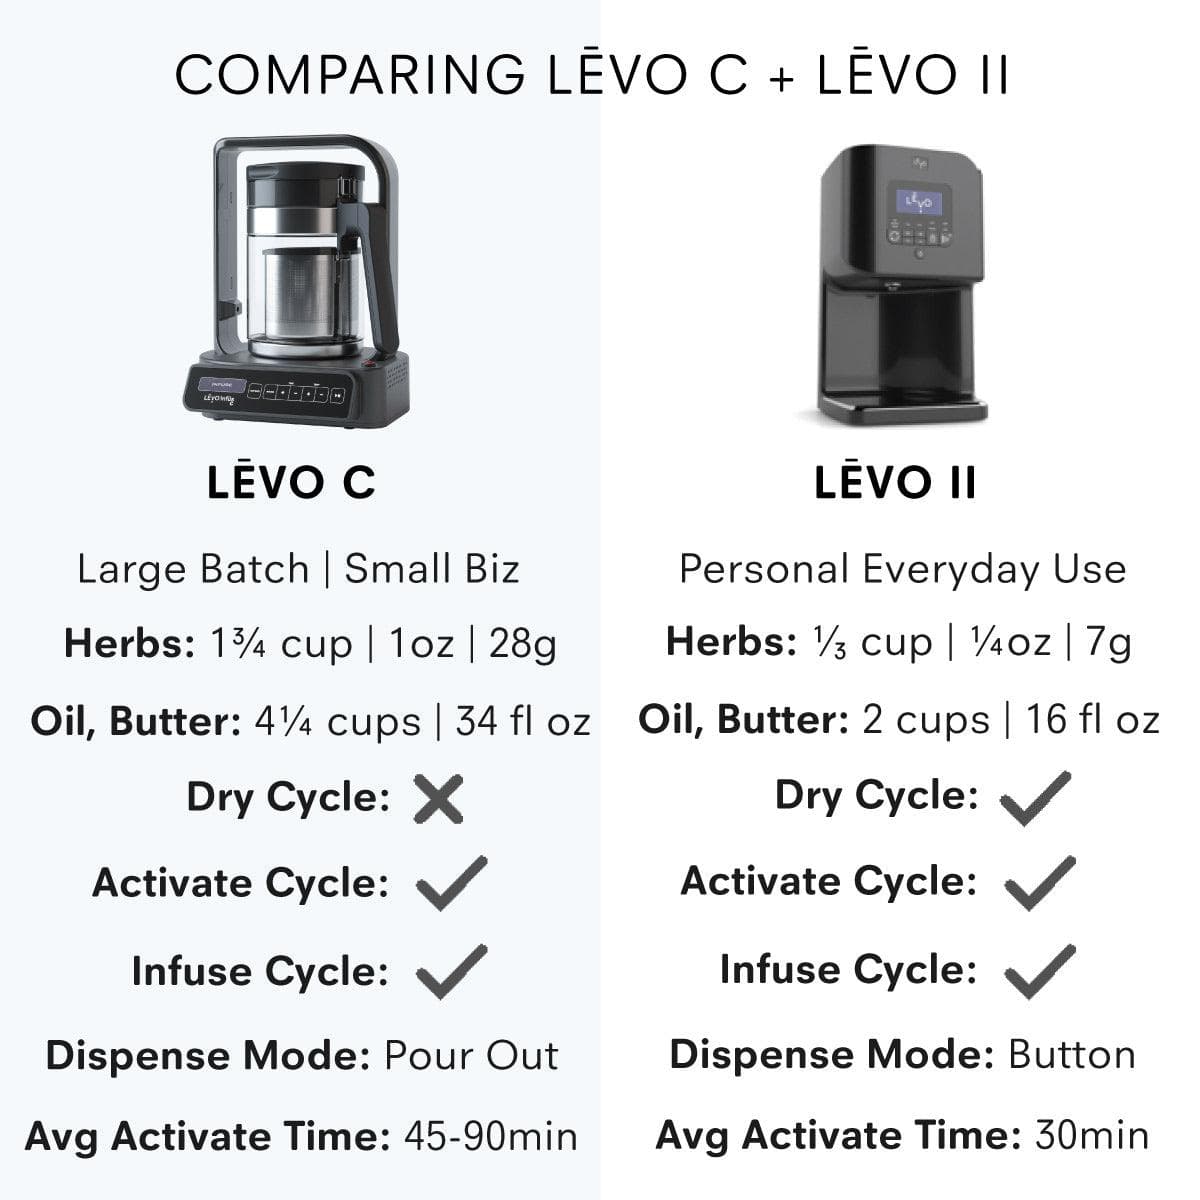 What is the difference between LEVO C and LEVO II?